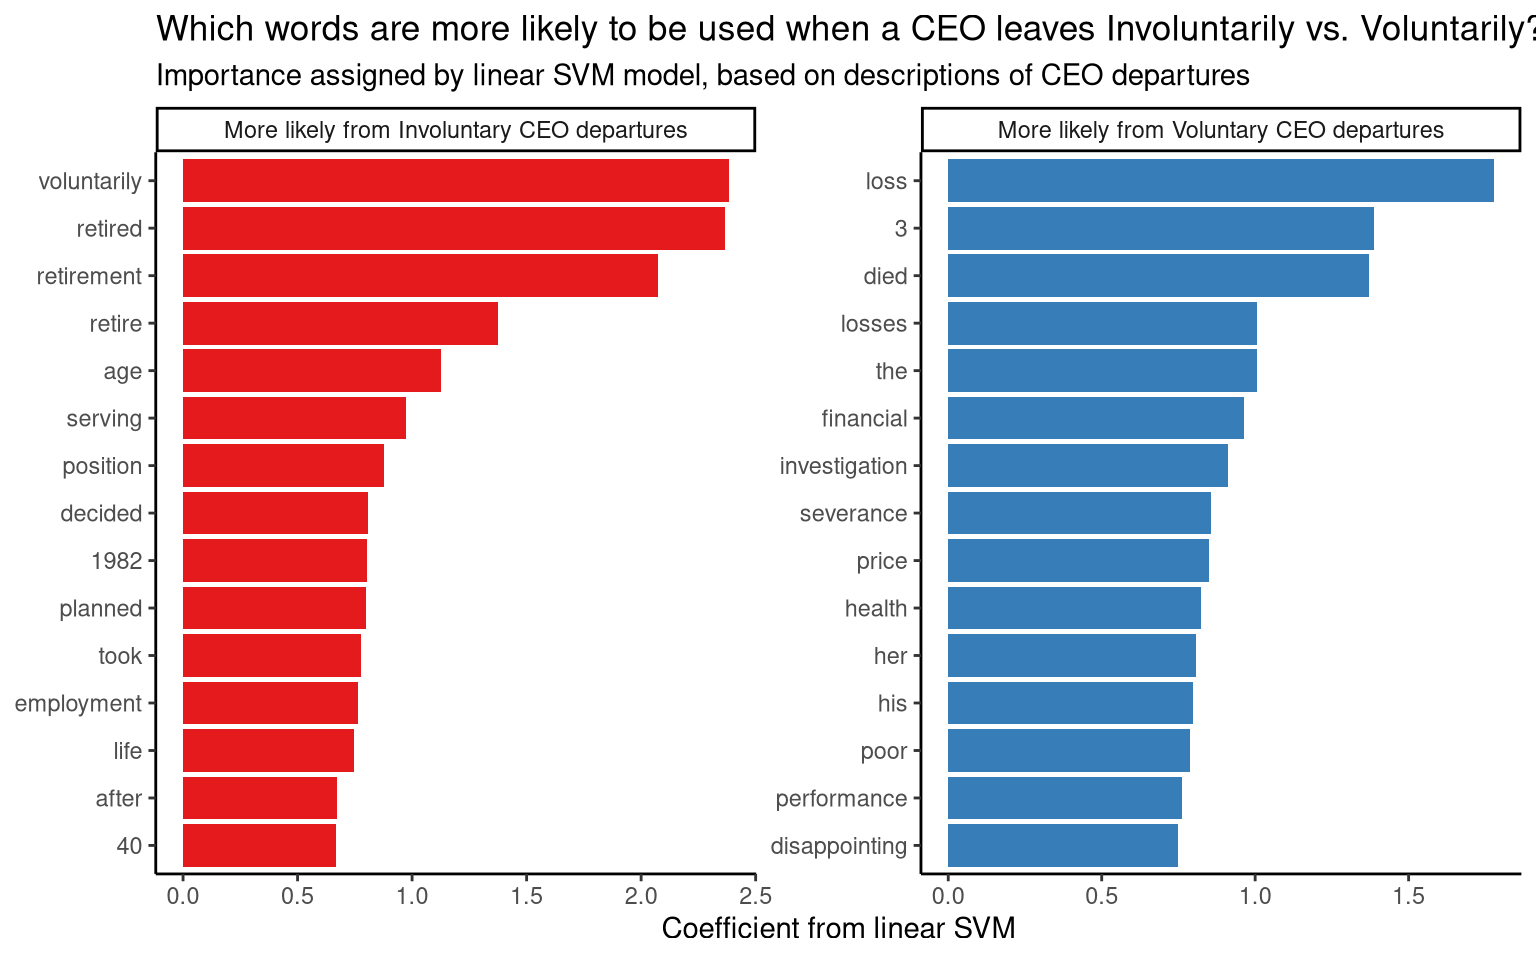 Words most likely to appear in CEO departure descriptions in each category, according to the linear SVM model.